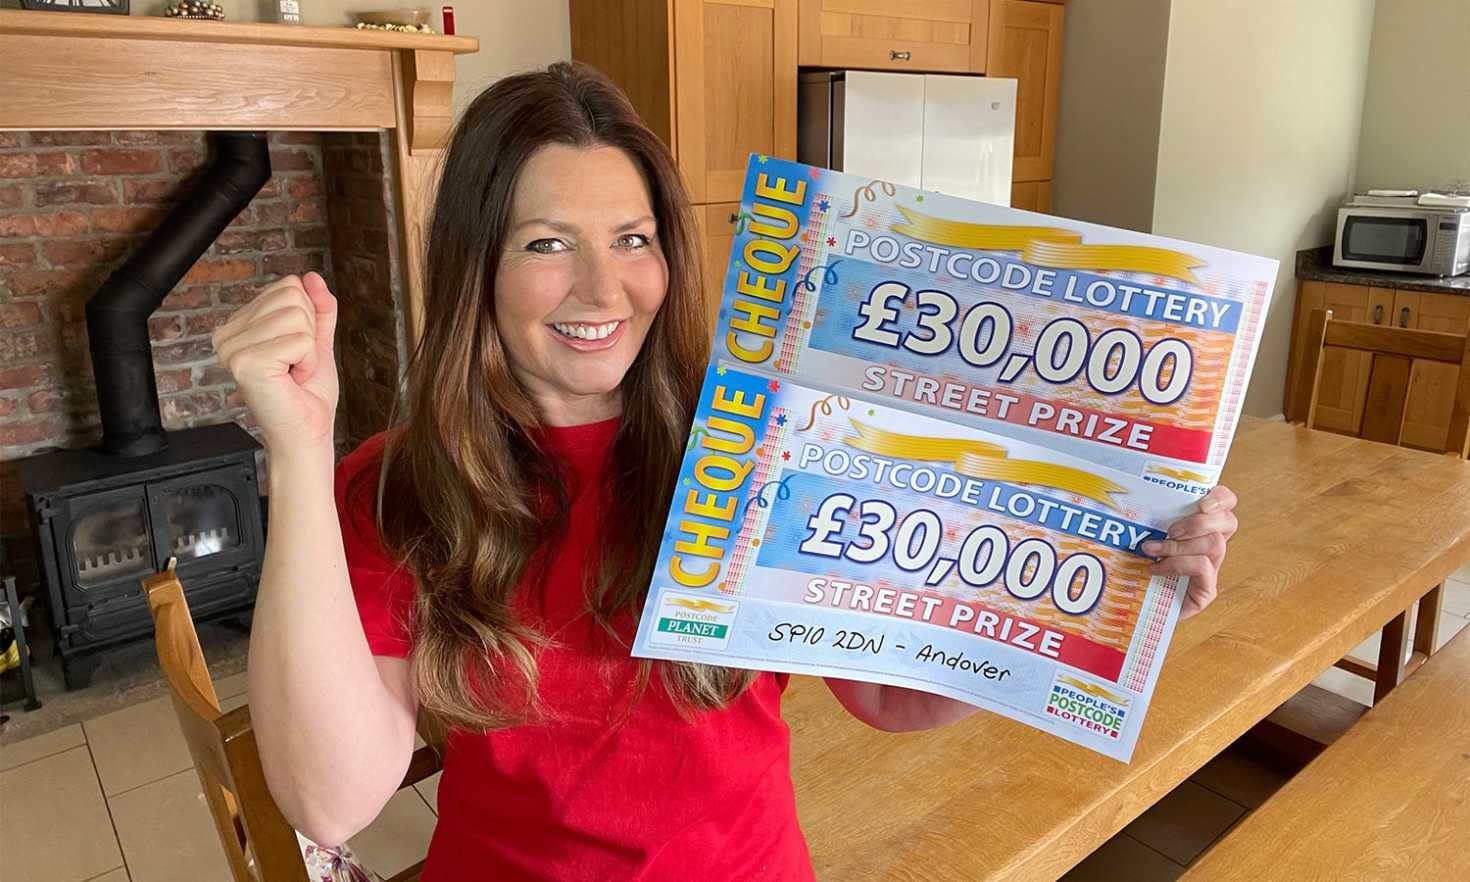 Judie has some amazing £30,000 Street Prizes for today's lucky winners in Andover